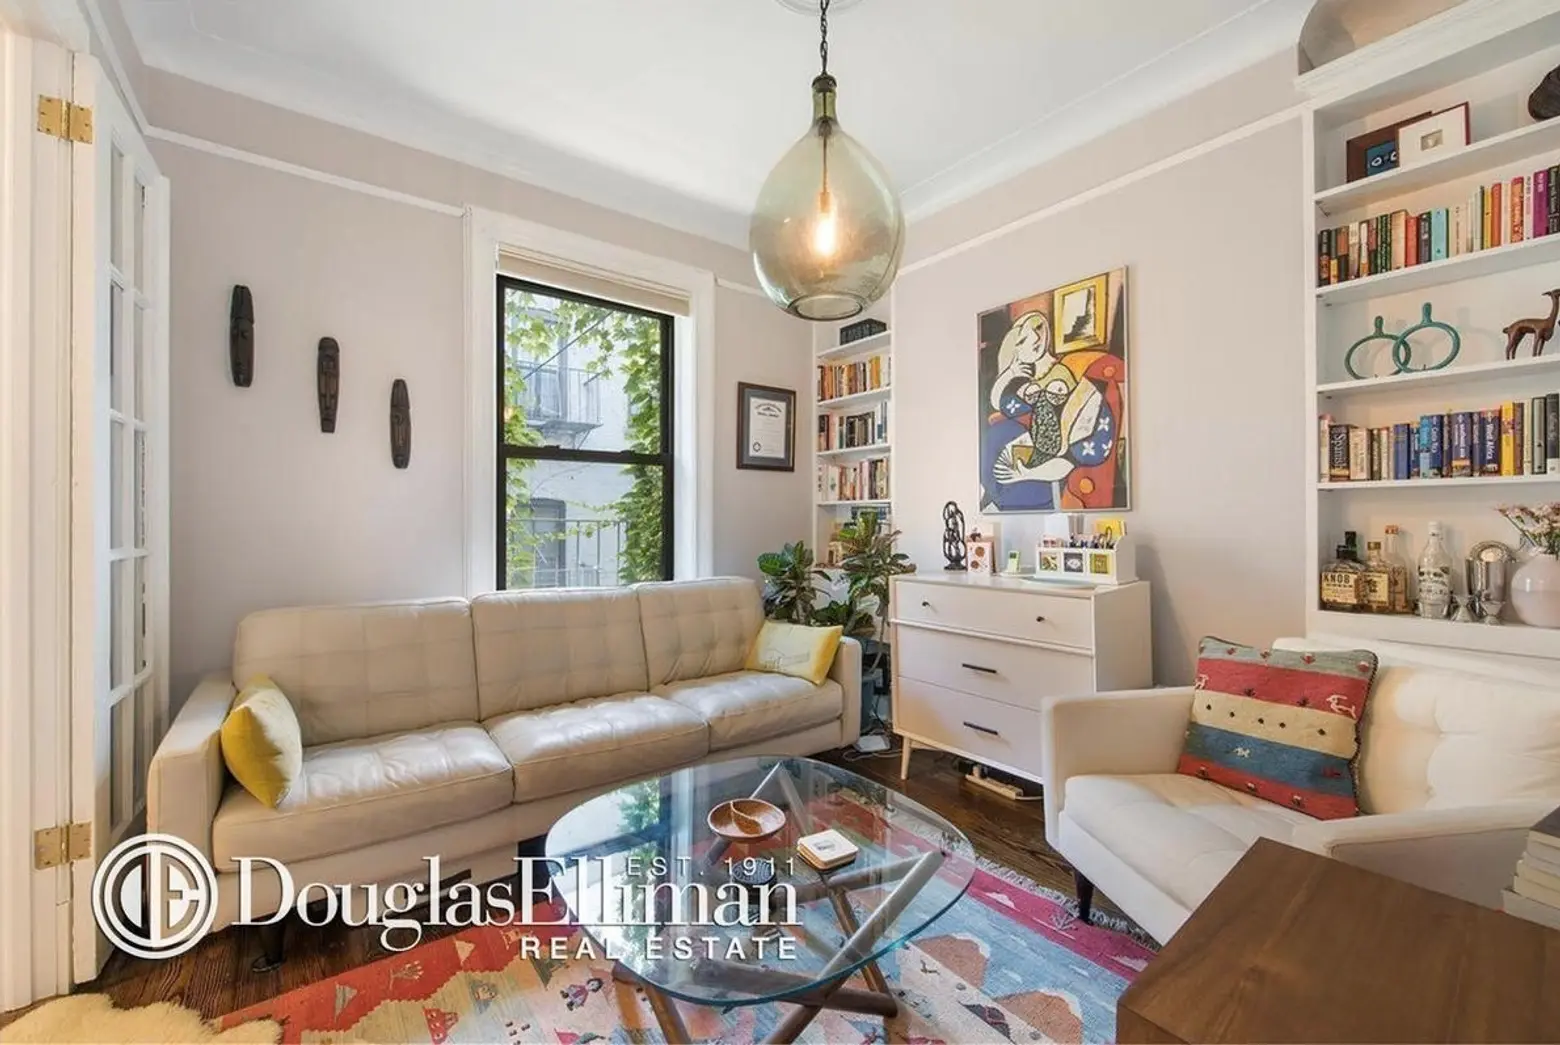 West Village Co-op Asking $800K Fits In Charm Over 650 Square Feet